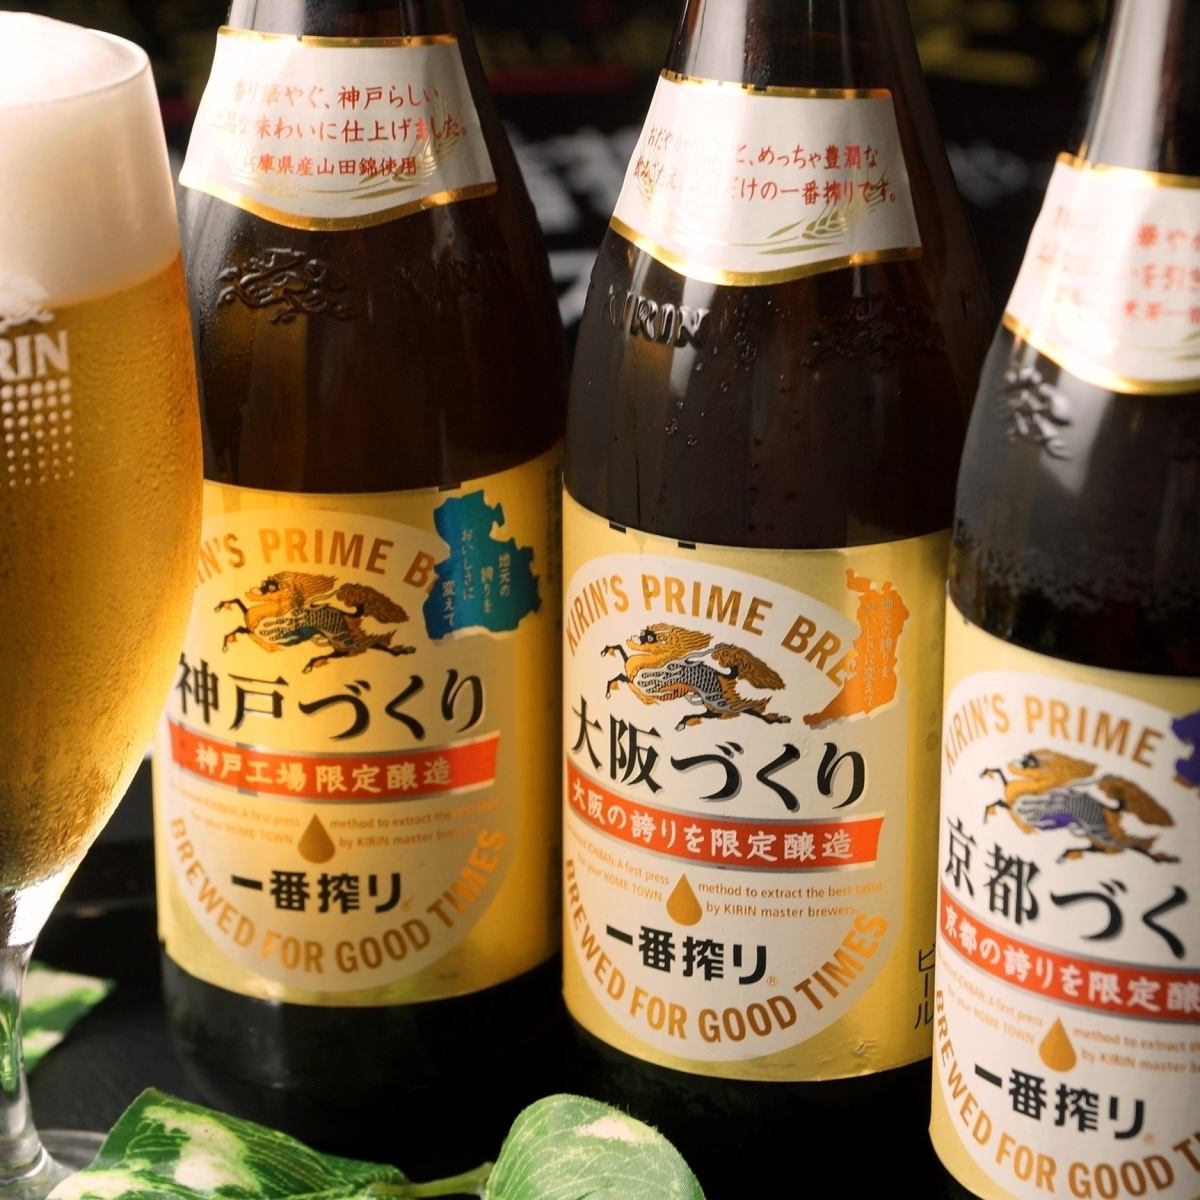 All-you-can-drink single item 2000 yen ☆ +1000 yen all-you-can-drink craft beer ♪